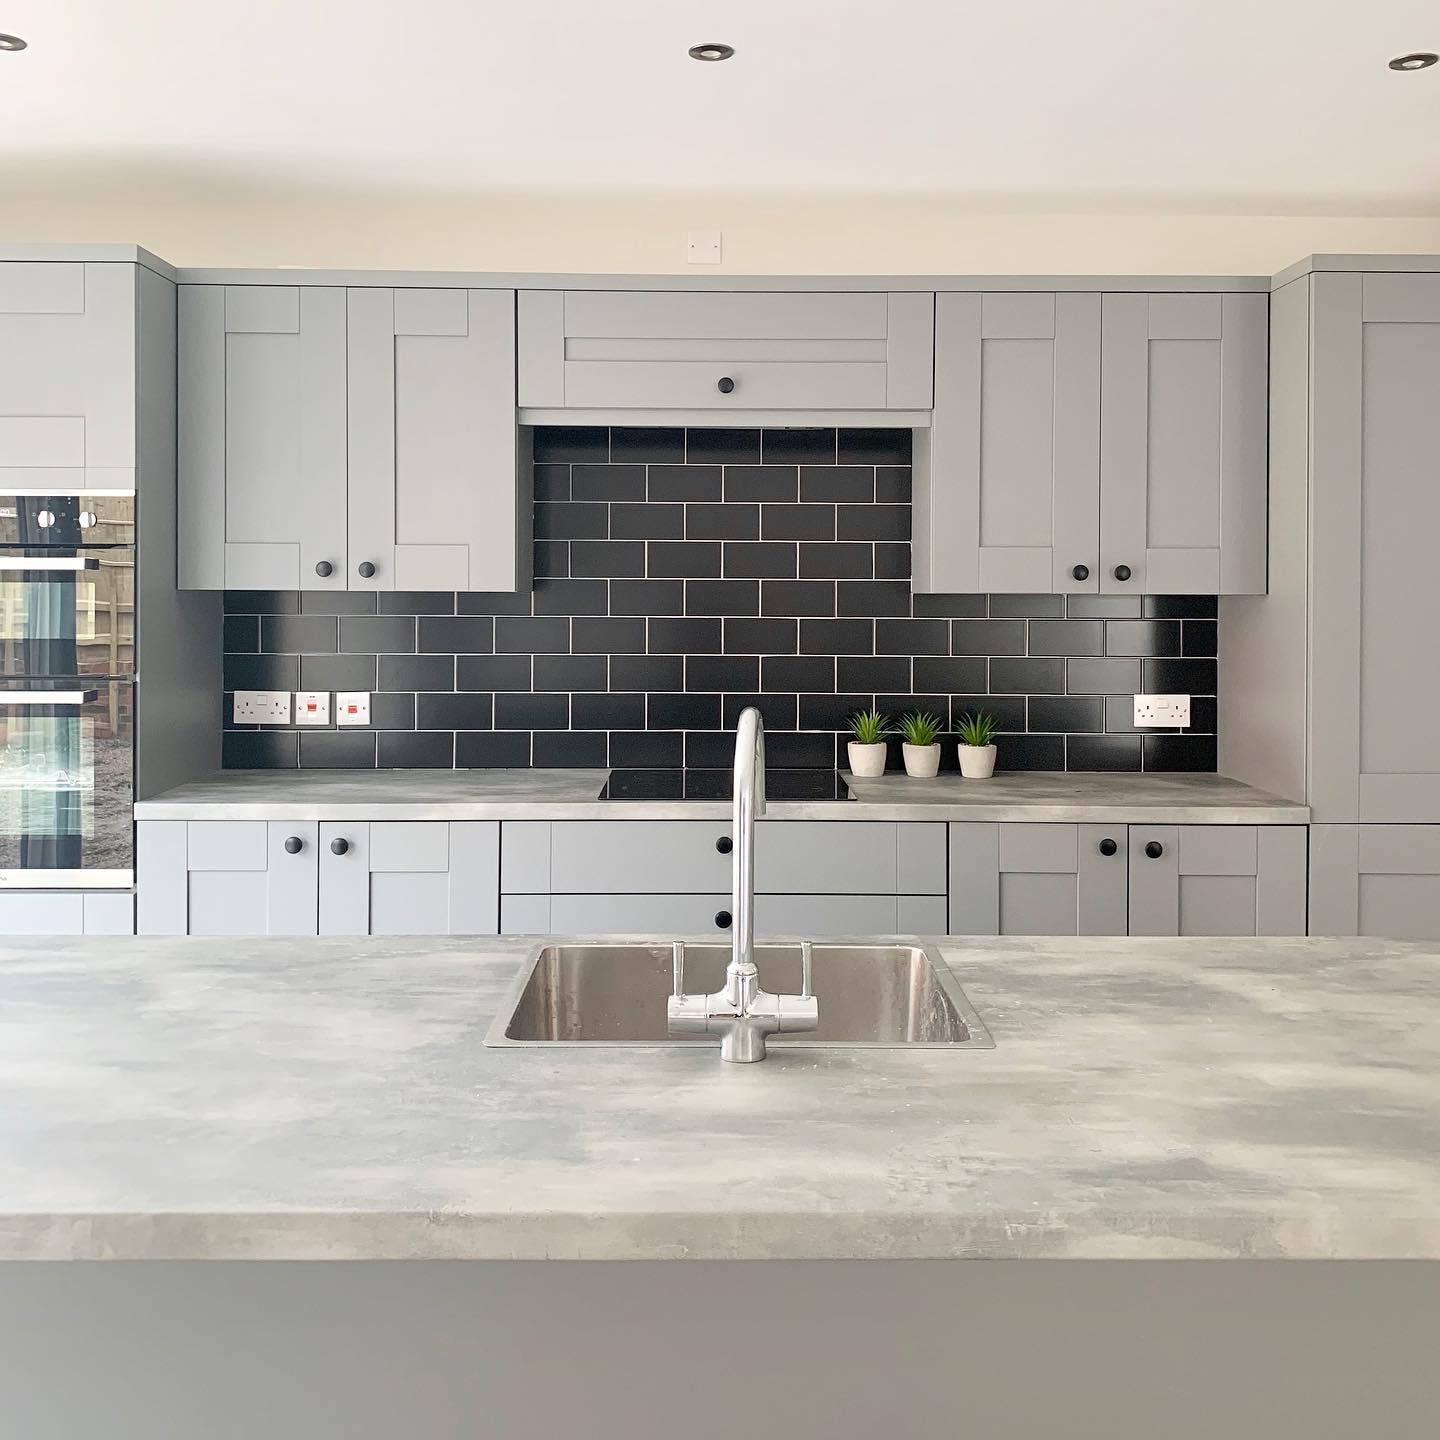 Charworth Home Grey Kitchen with Statement Tiles and Laminate Worktop